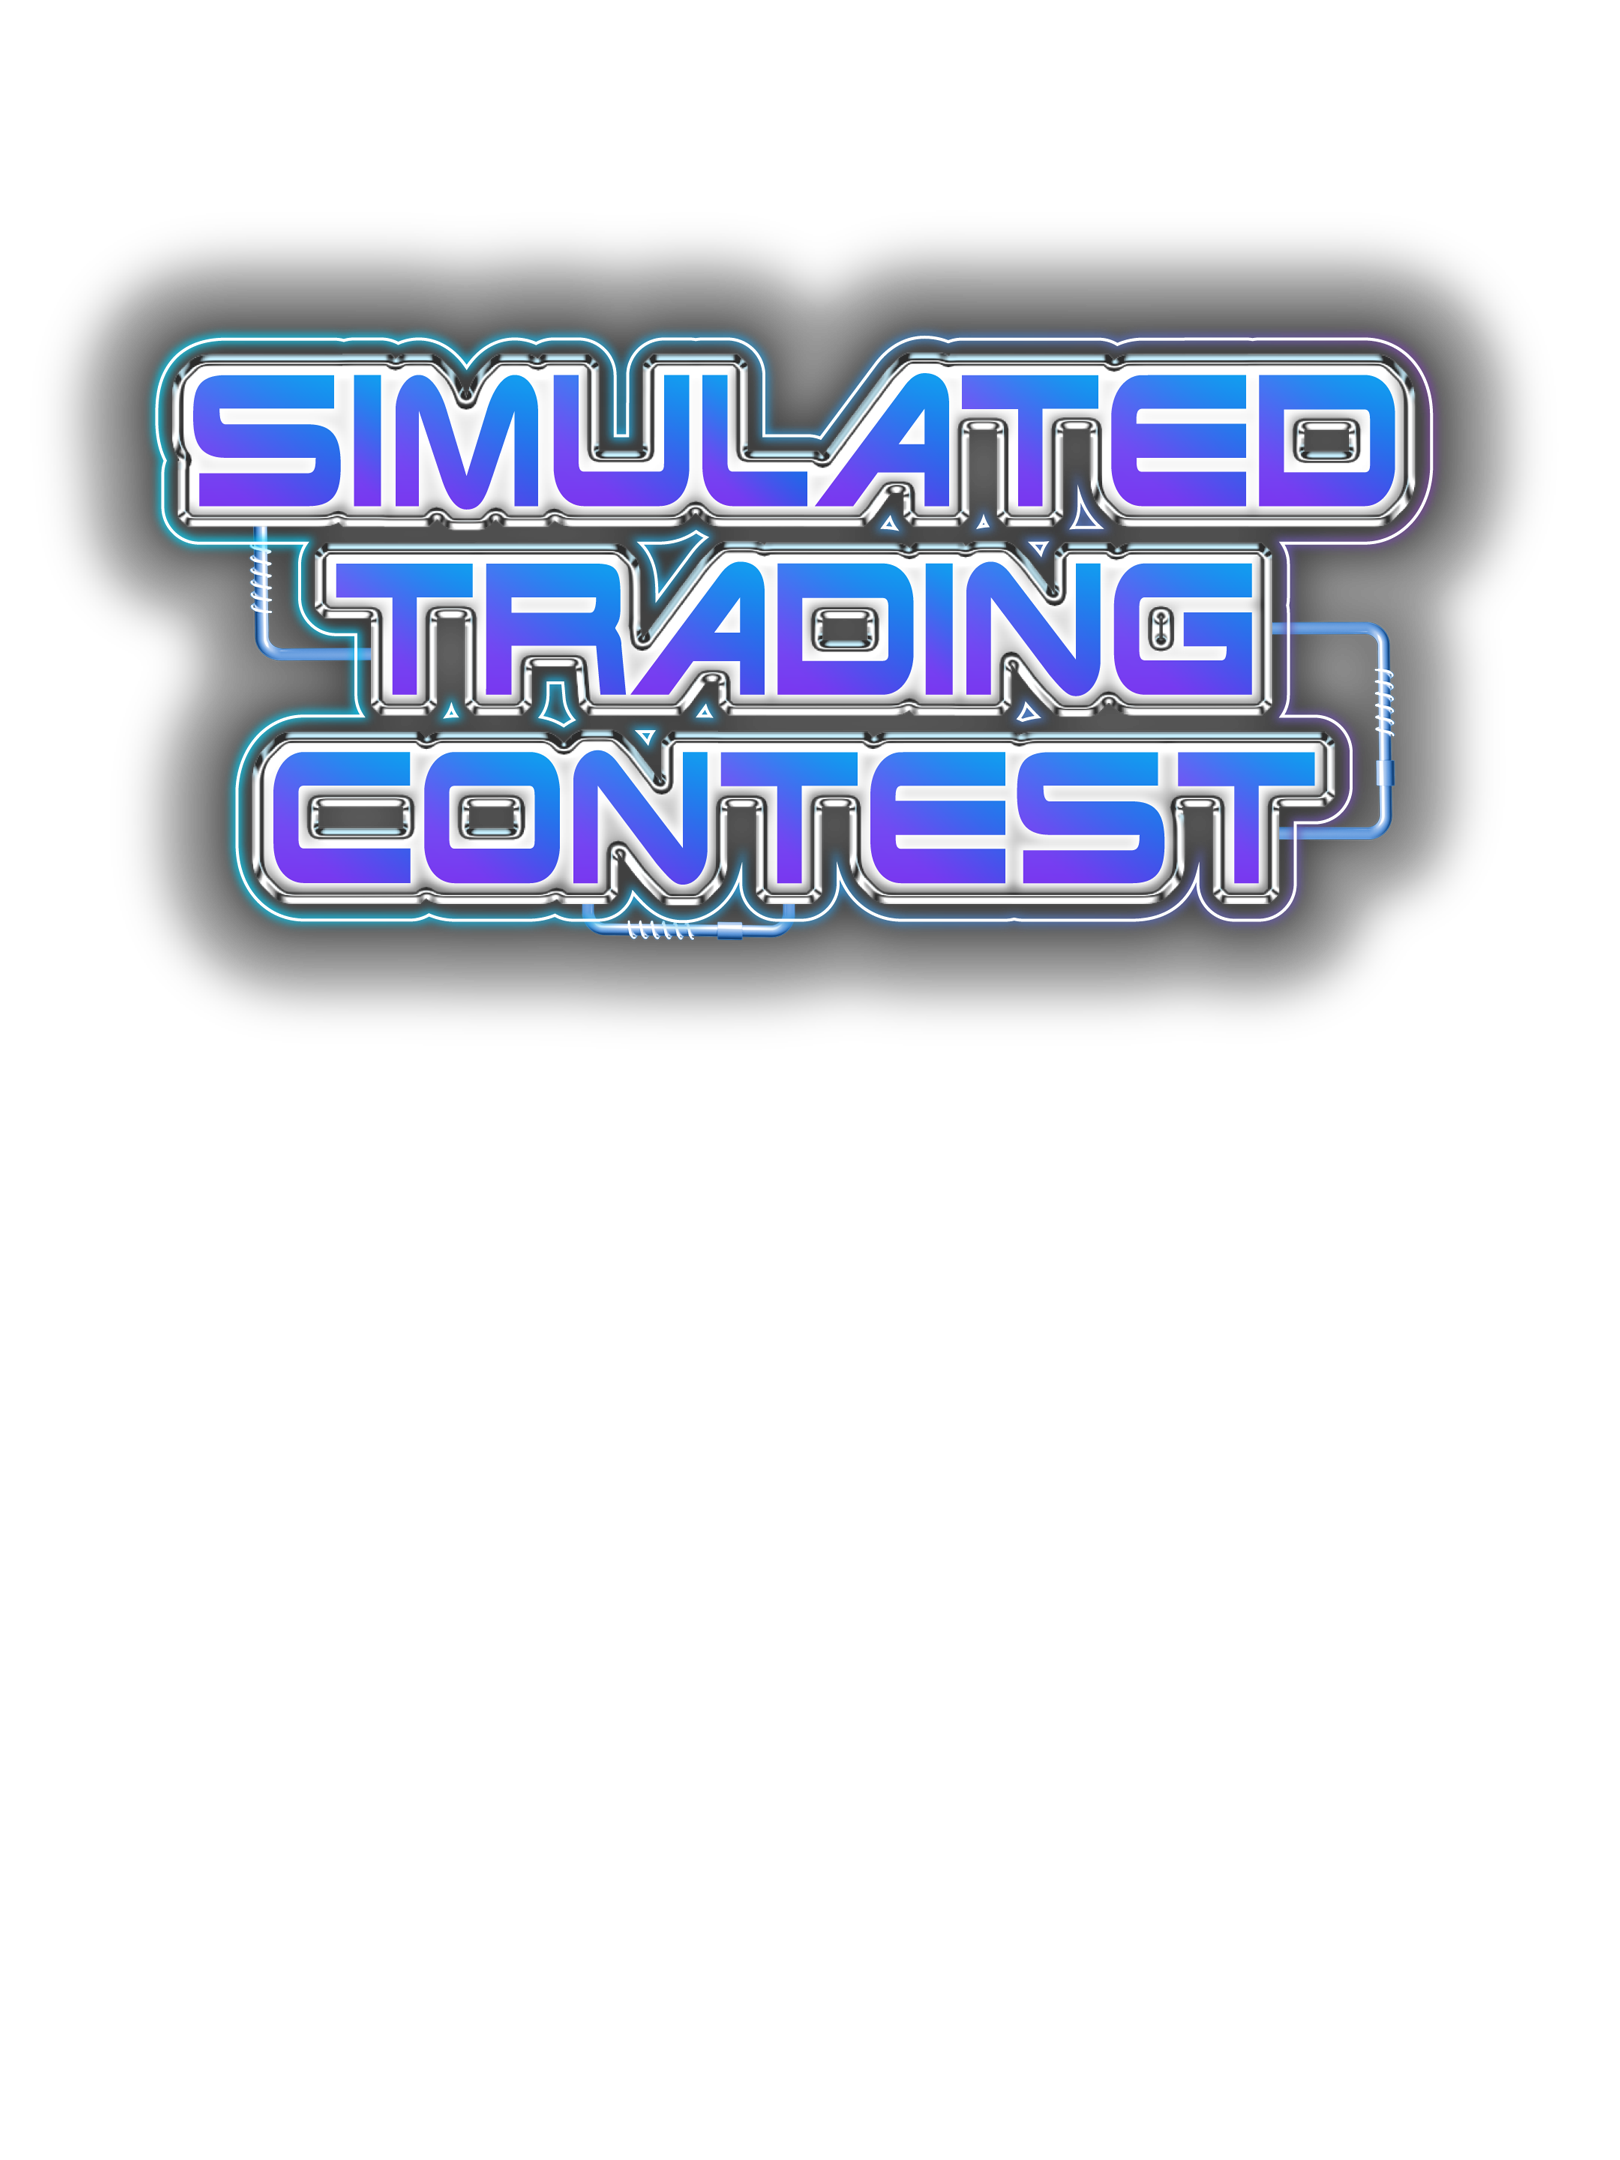 Simulated Trading Contest